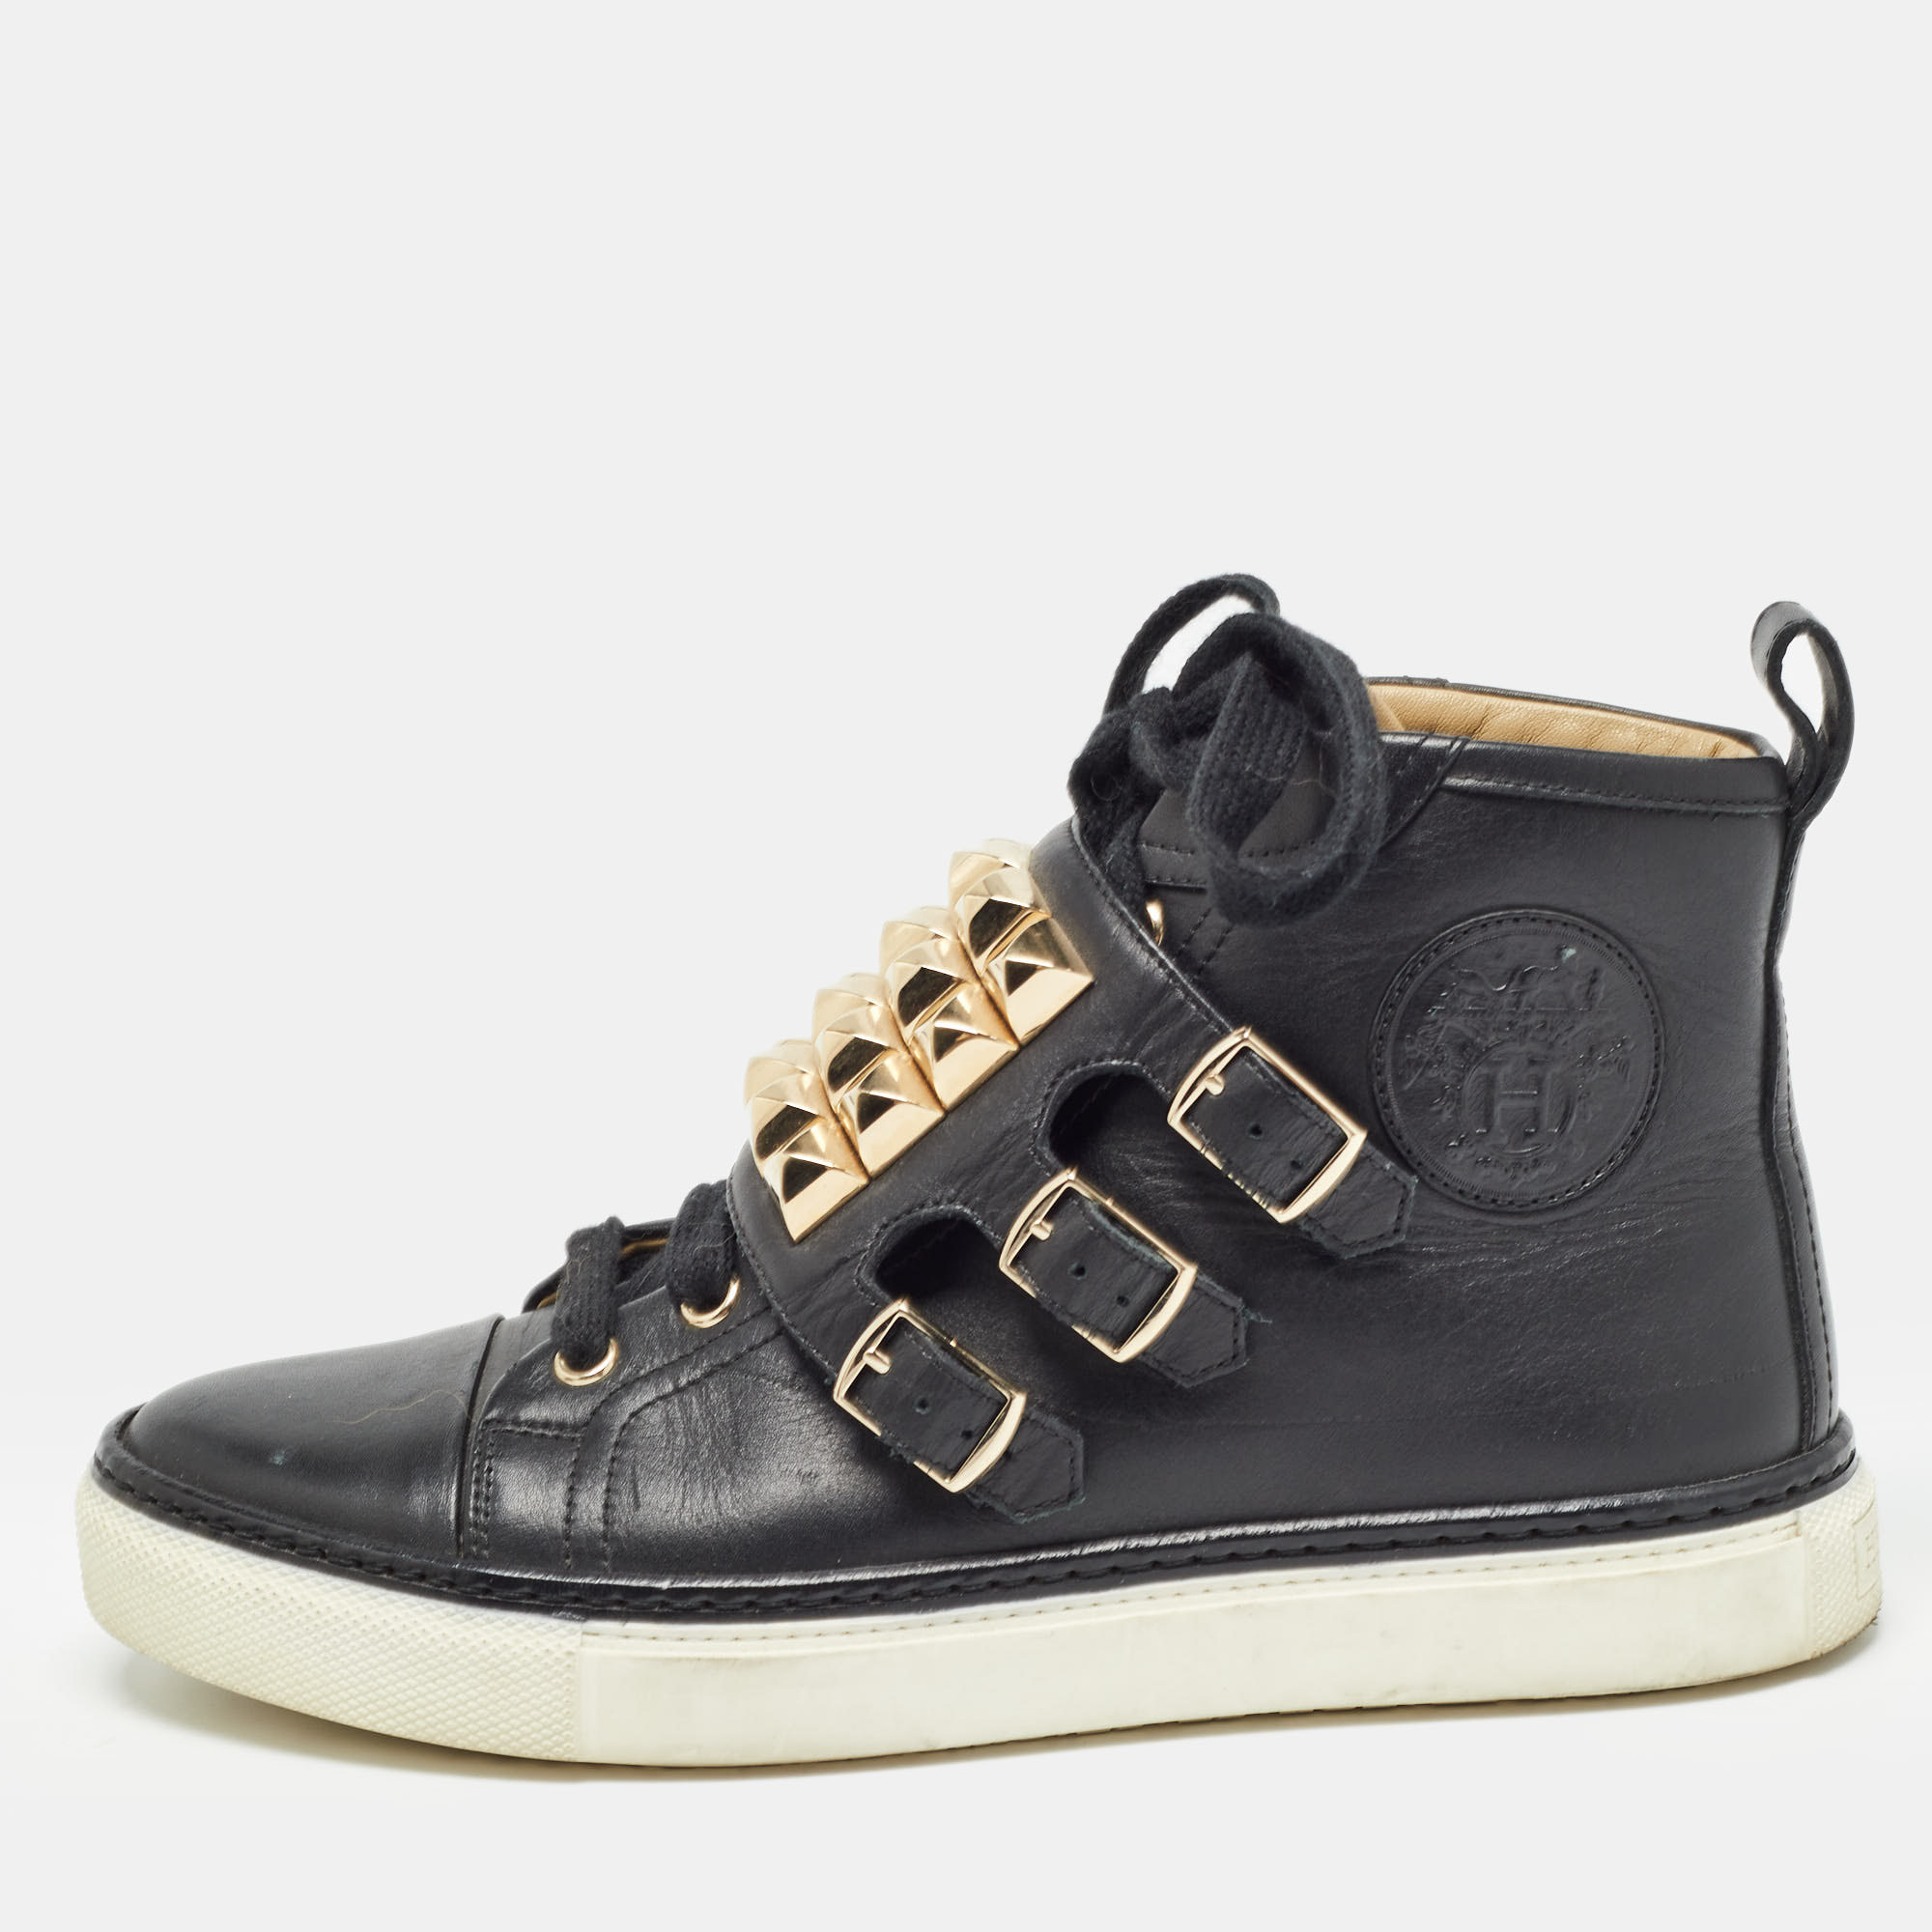 Pull off a super stylish look with ease in this pair of black high top sneakers from the house of Hermes. Crafted from leather the Lennox shoes truly embody luxury and comfort with their unique studded design. They feature lace ups gold tone buckles leather insoles and tough soles. A statement pair worthy of being flaunted